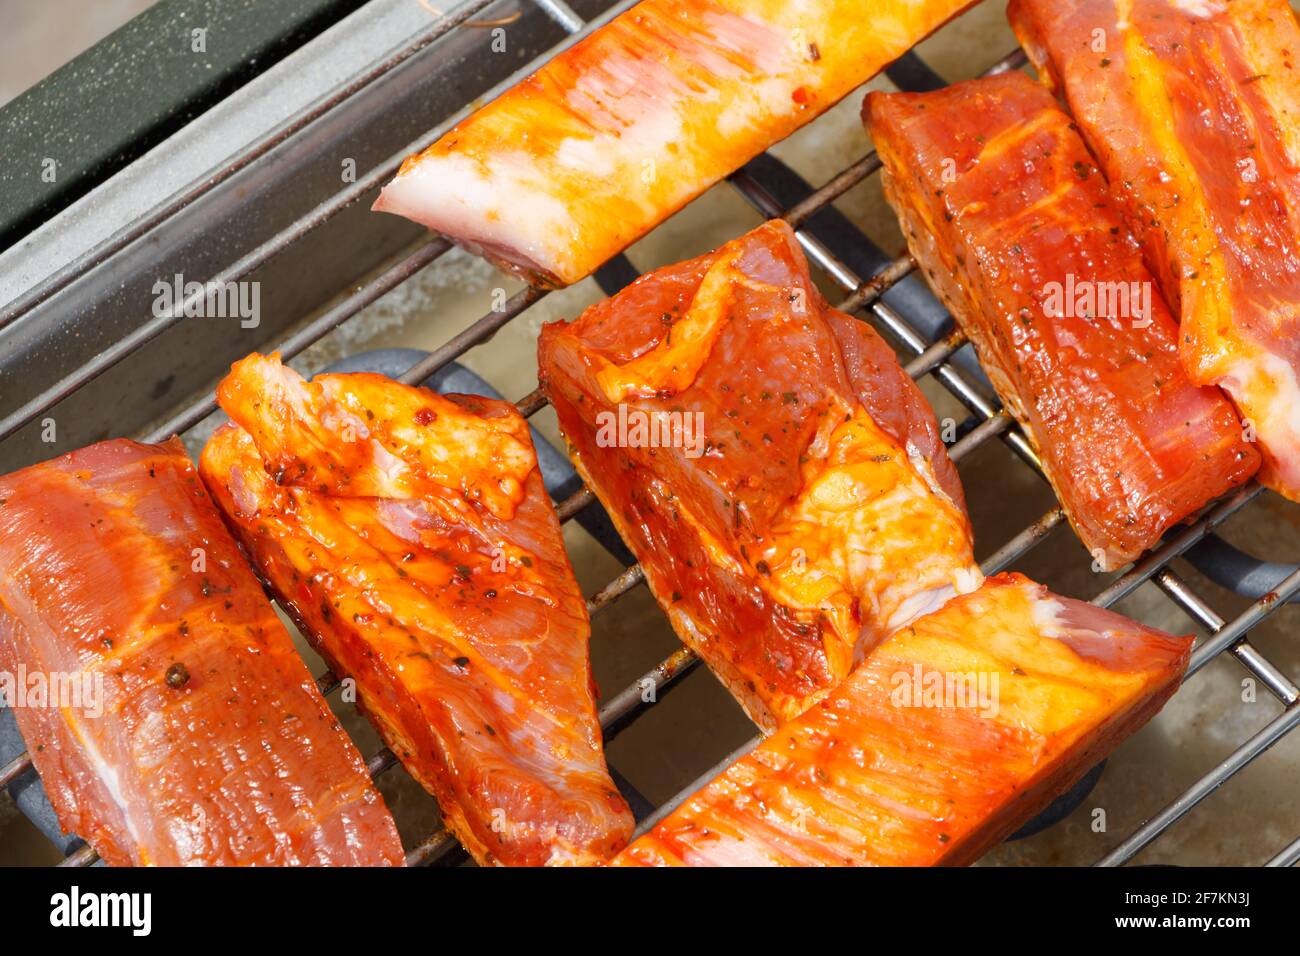 Pieces of marinated pork on the grid of an electric barbecue Stock Photo